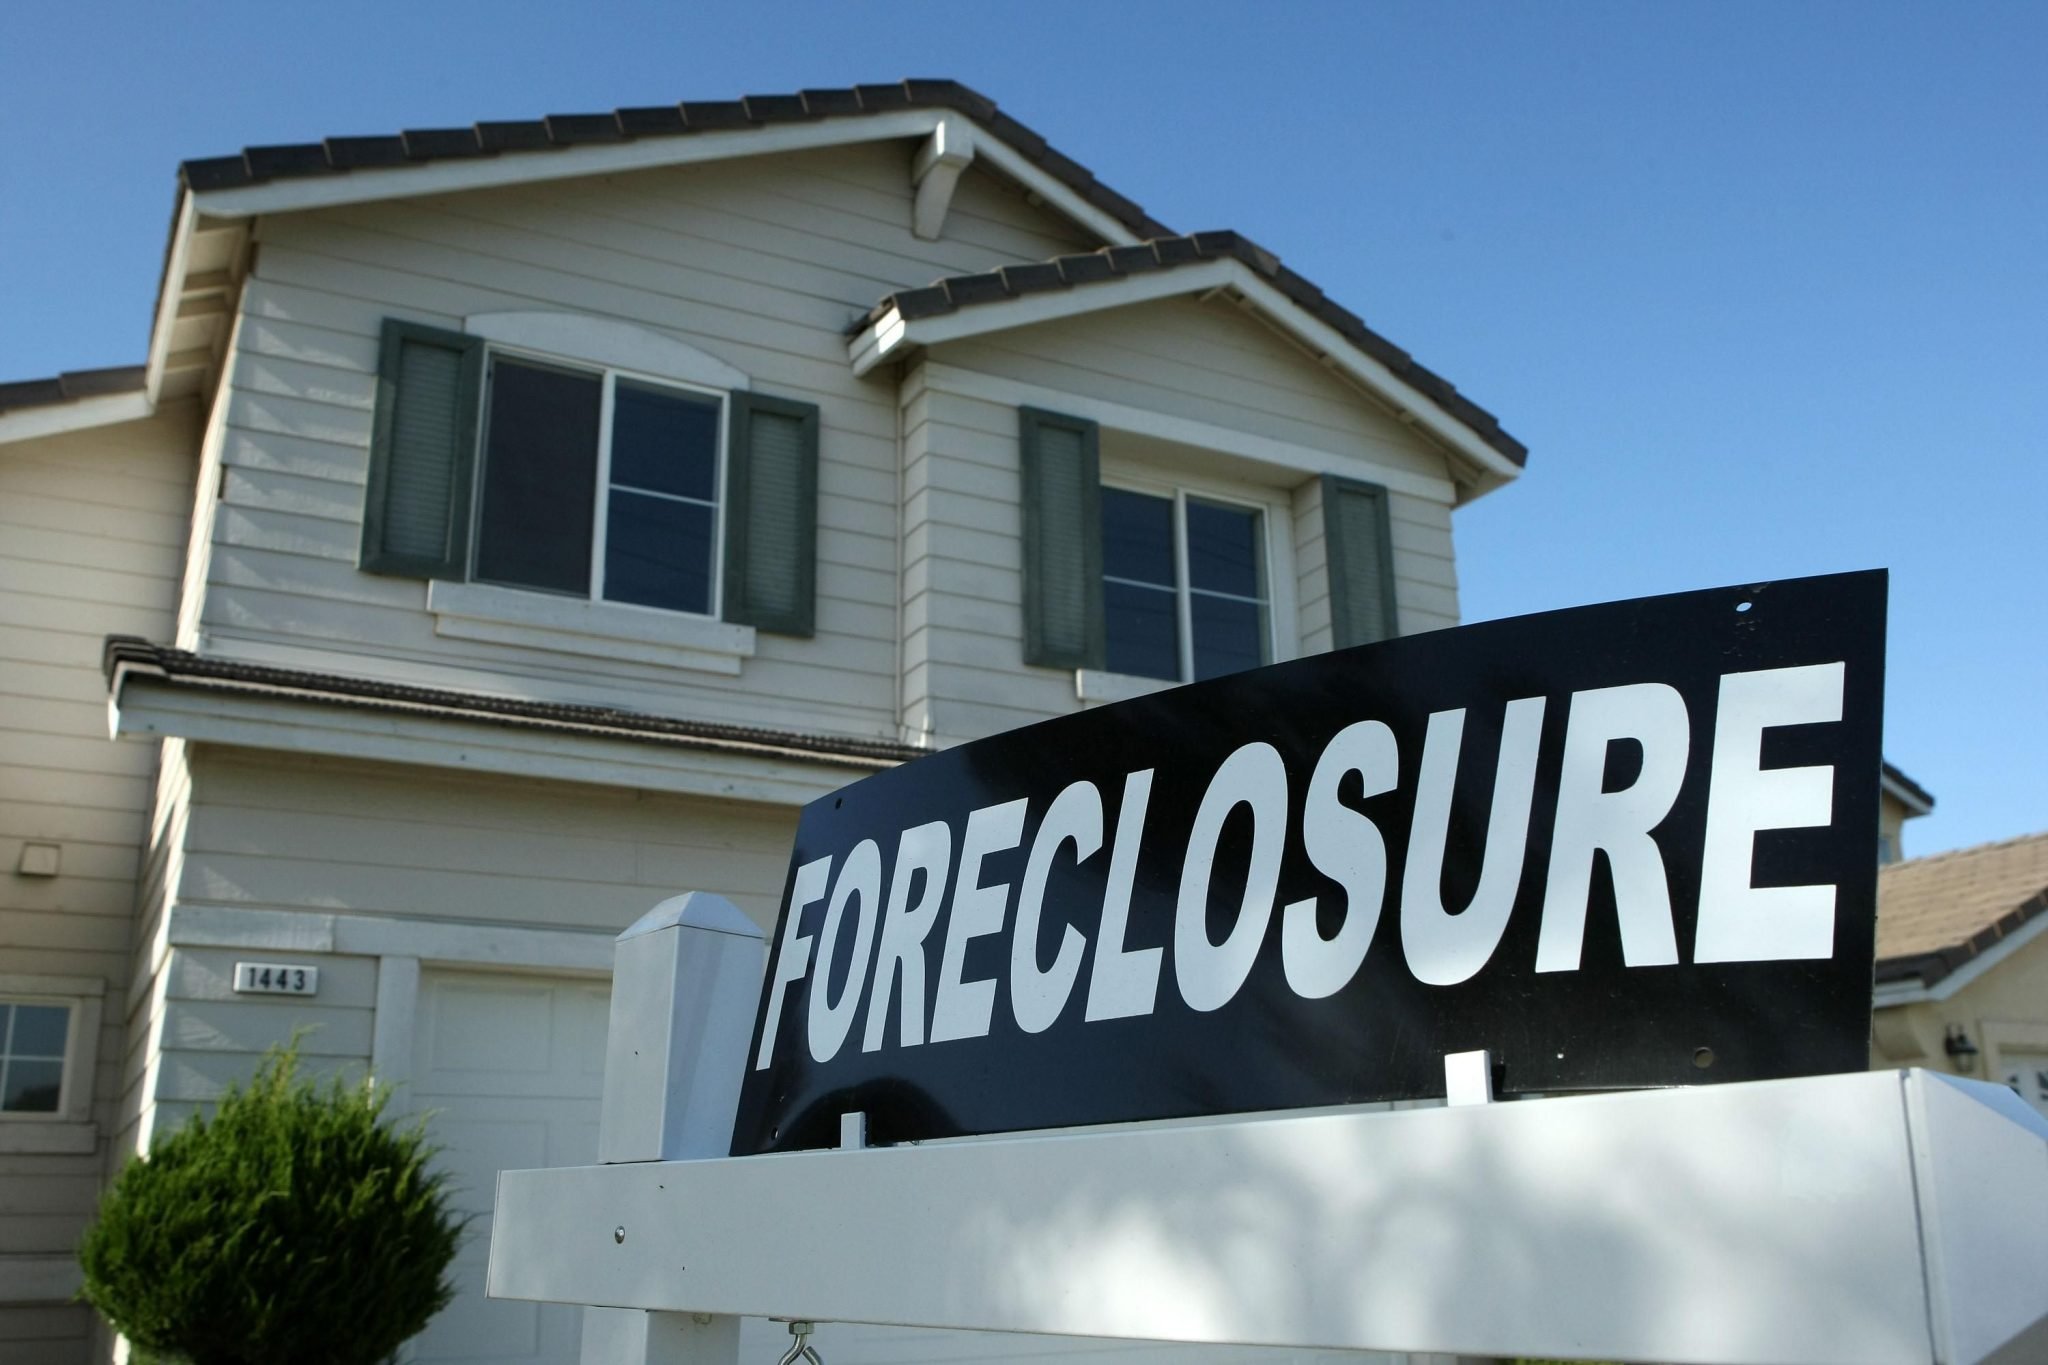 Stopping Foreclosure in Texas  Miraculous Investments LLC